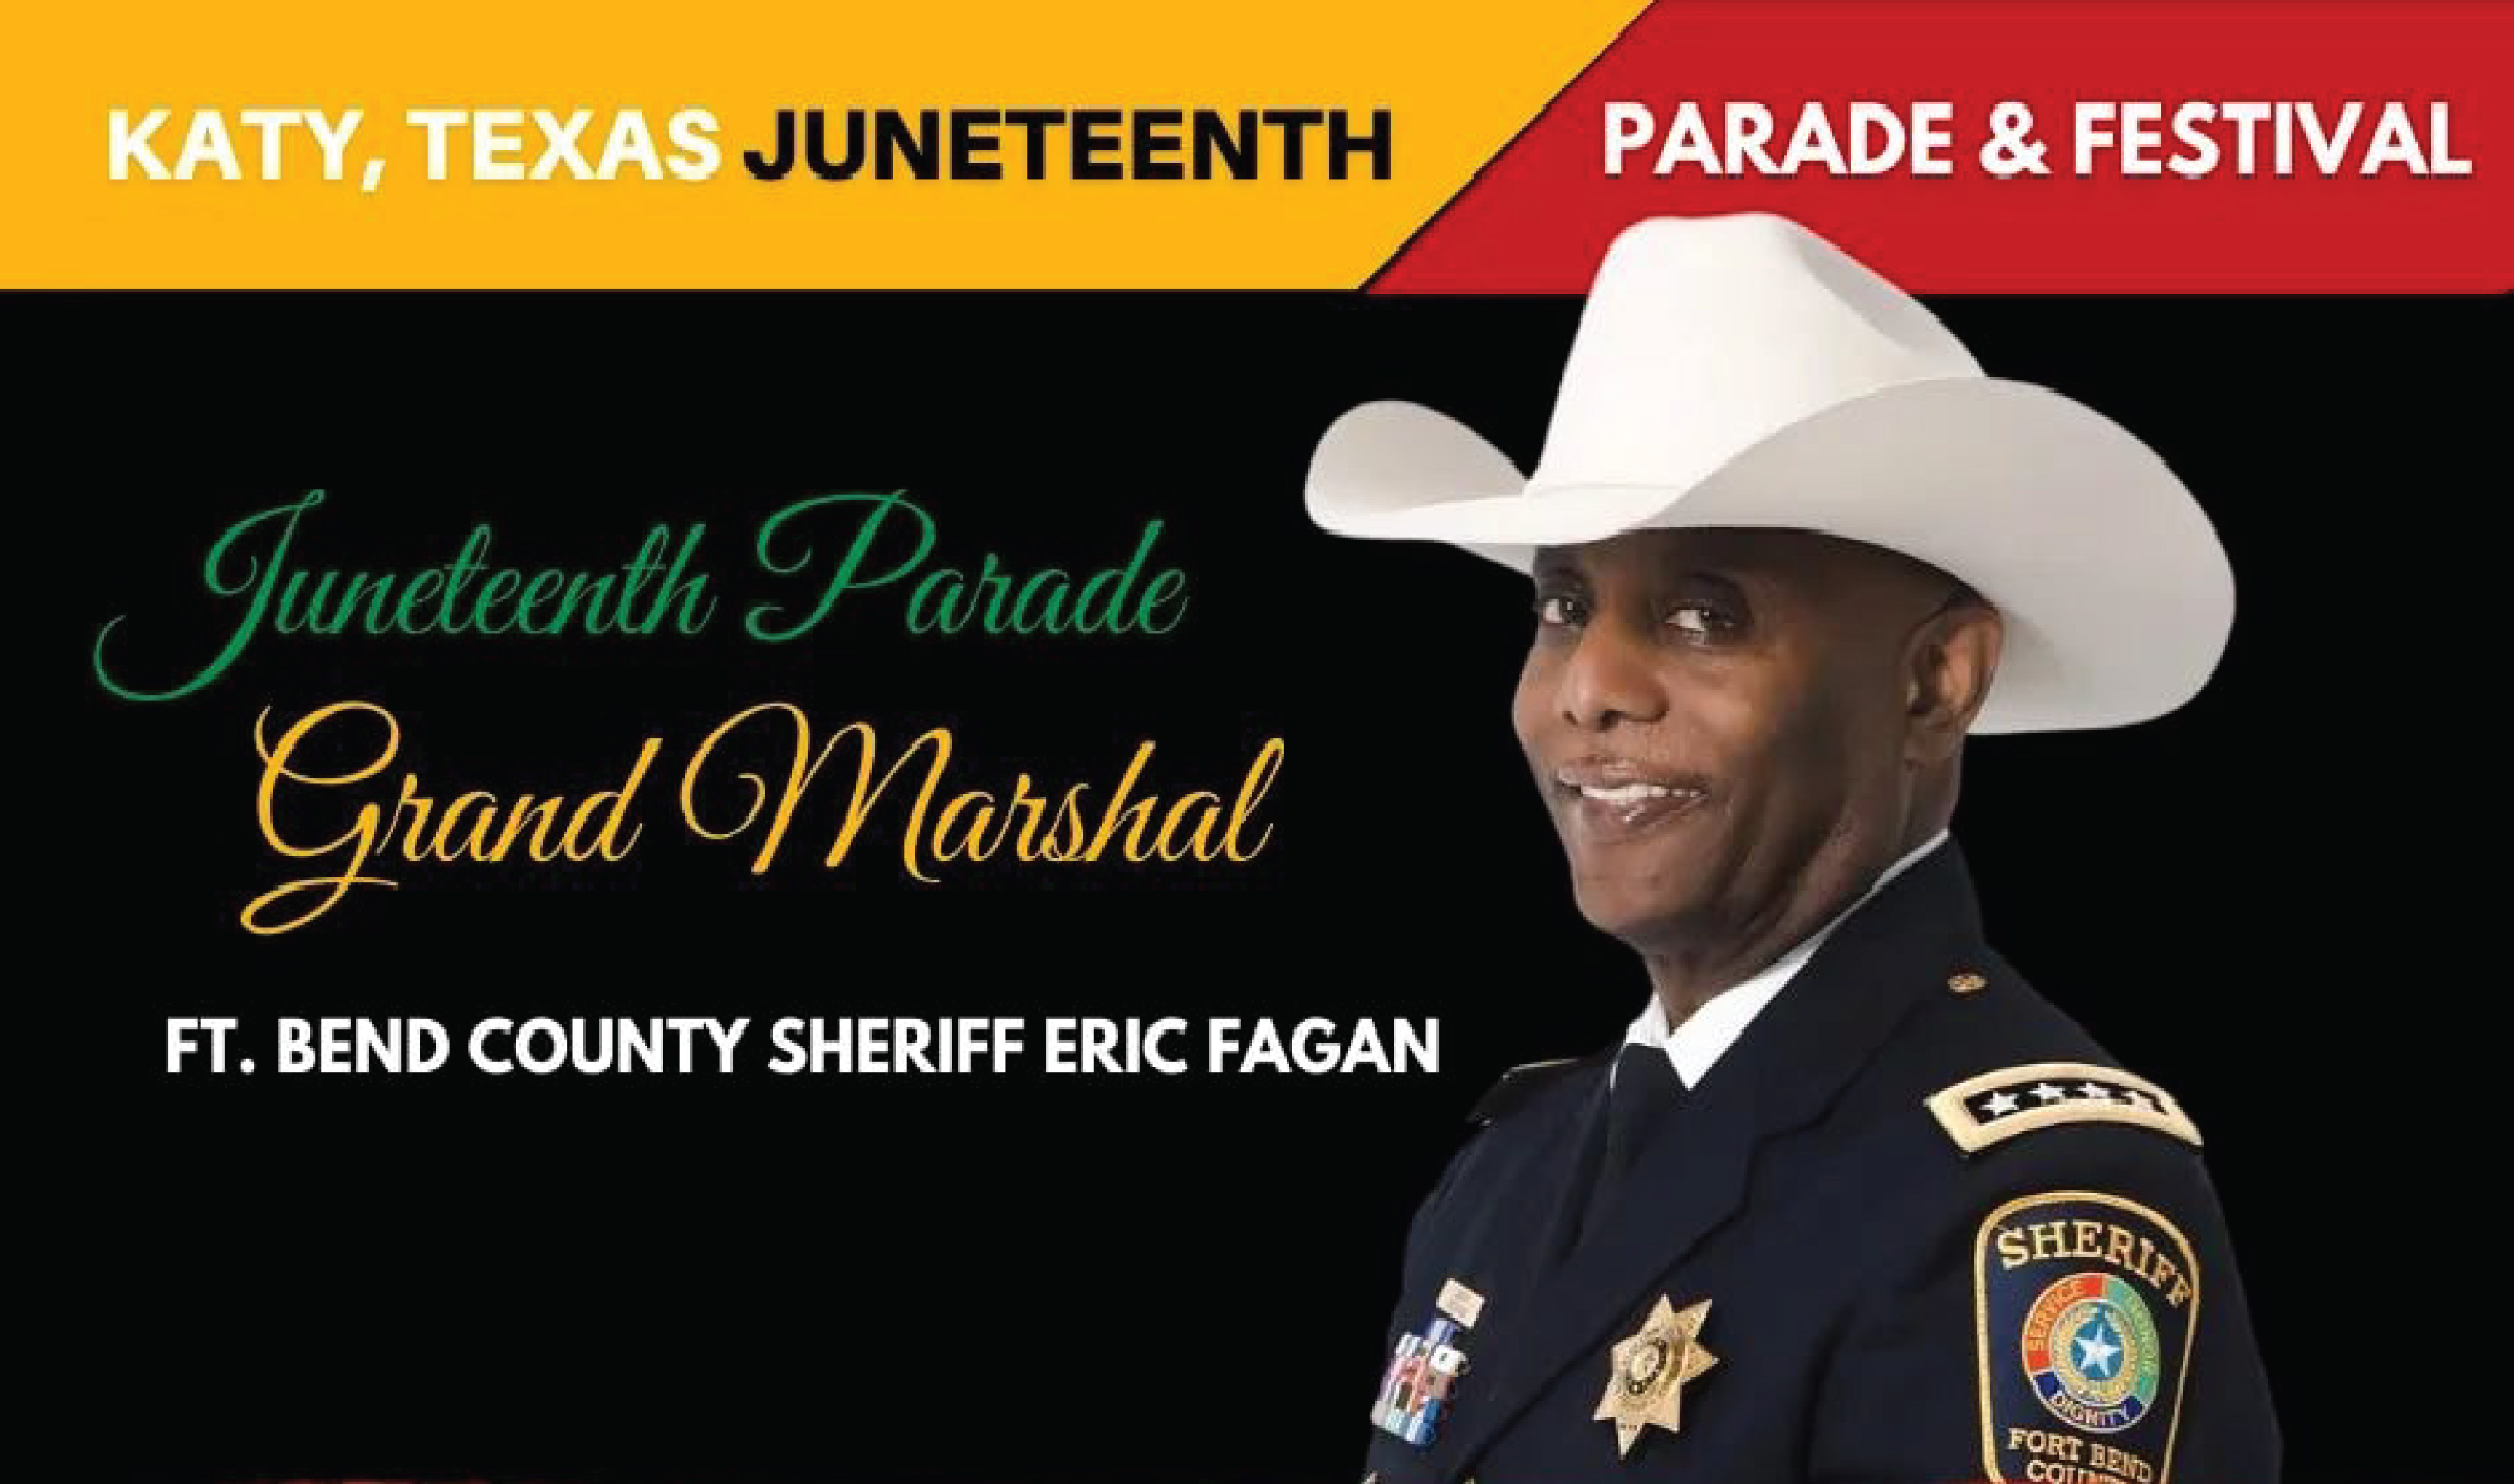 Celebrate Juneteenth at the First Annual Katy, Texas Juneteenth Parade & Festival 